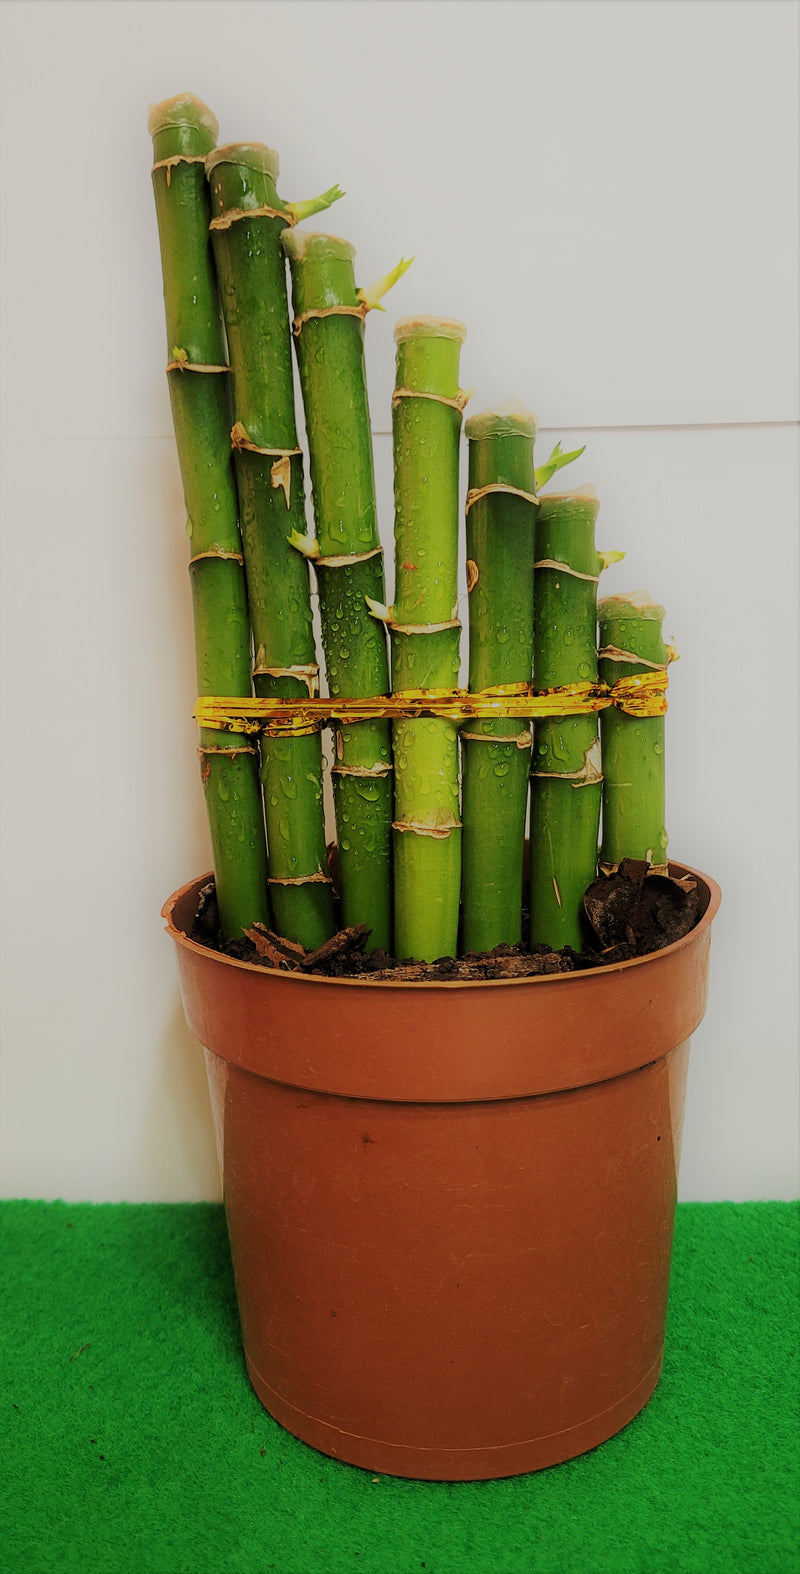 DESKTOP LUCKY BAMBOO G 7 TRI (7 STALKS POTTED)